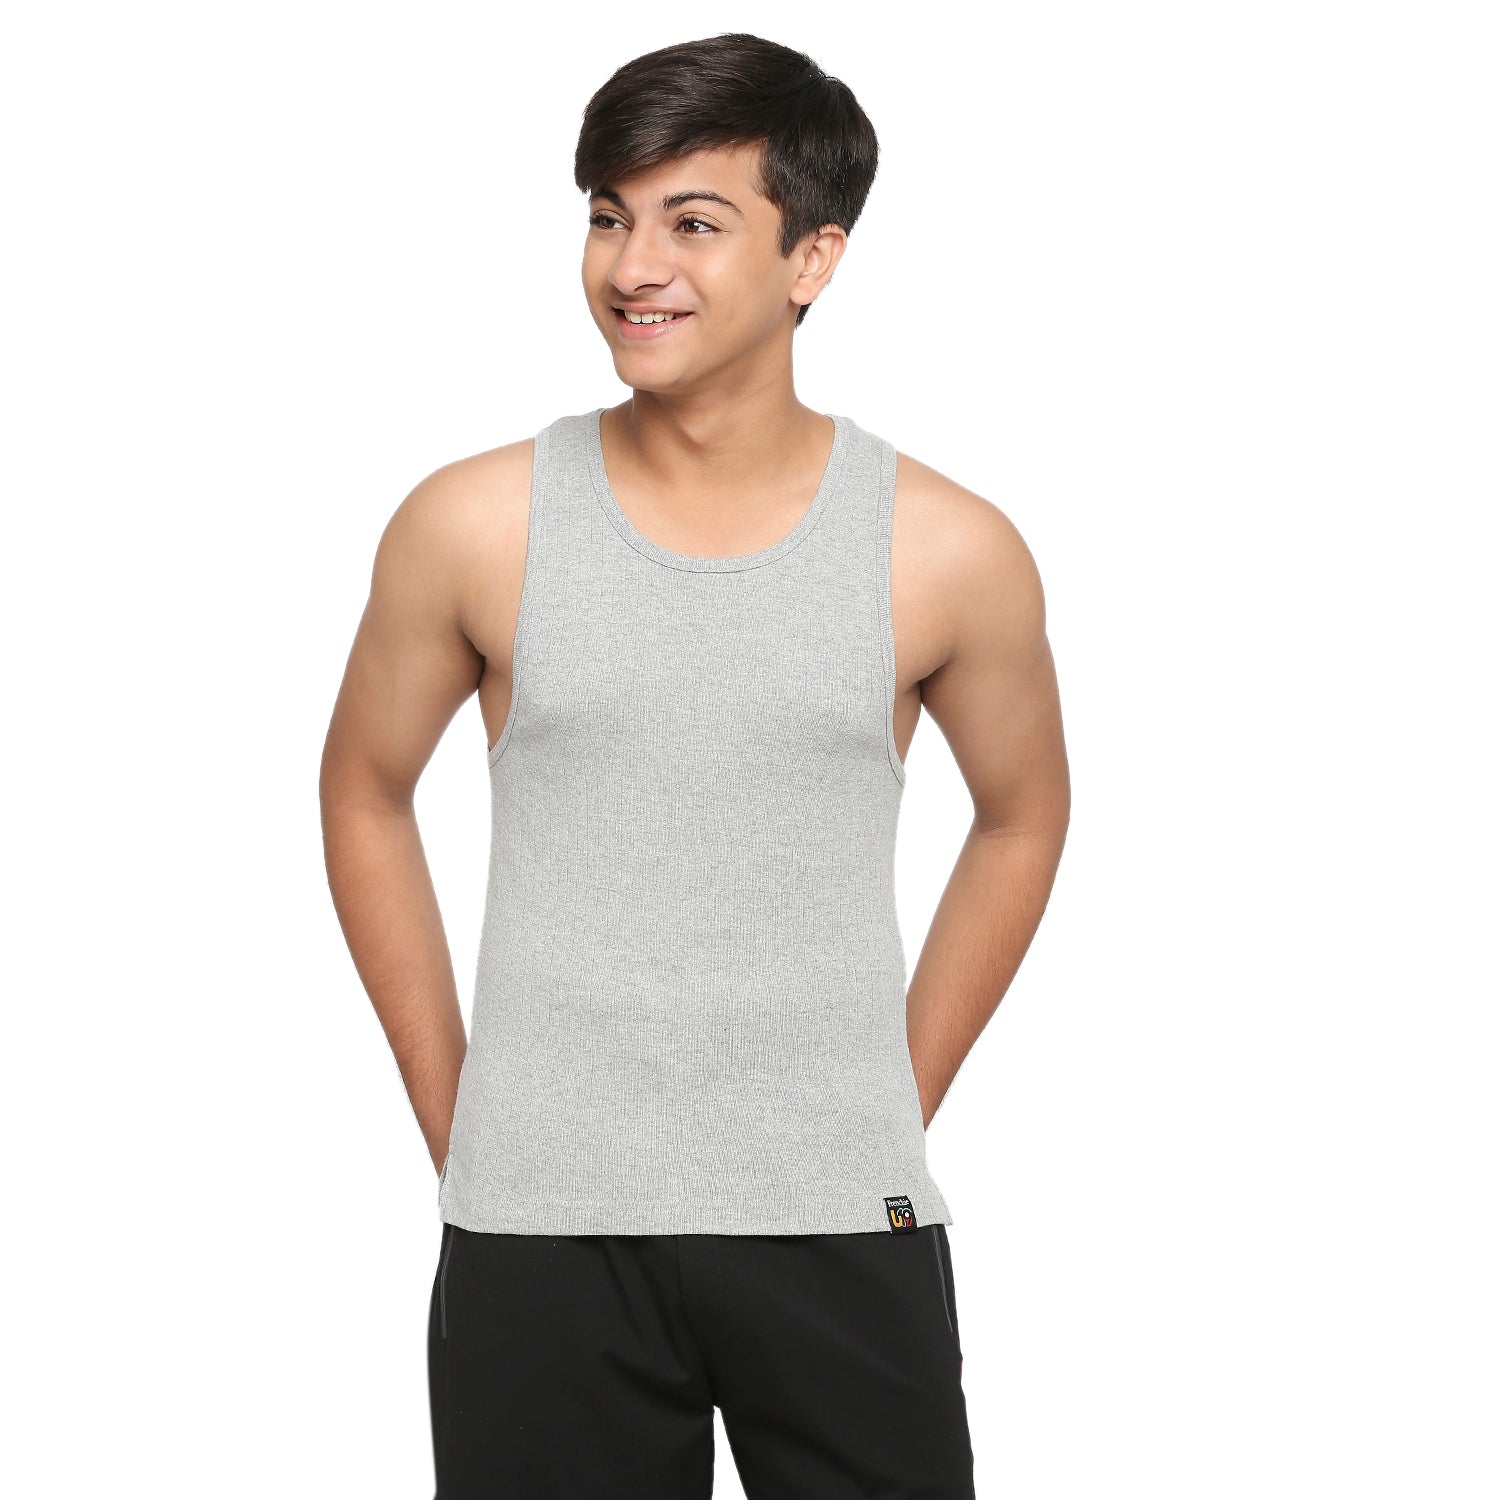 Frenchie U-19 Teens Solid Gray Vest made in 100% Cotton Rib